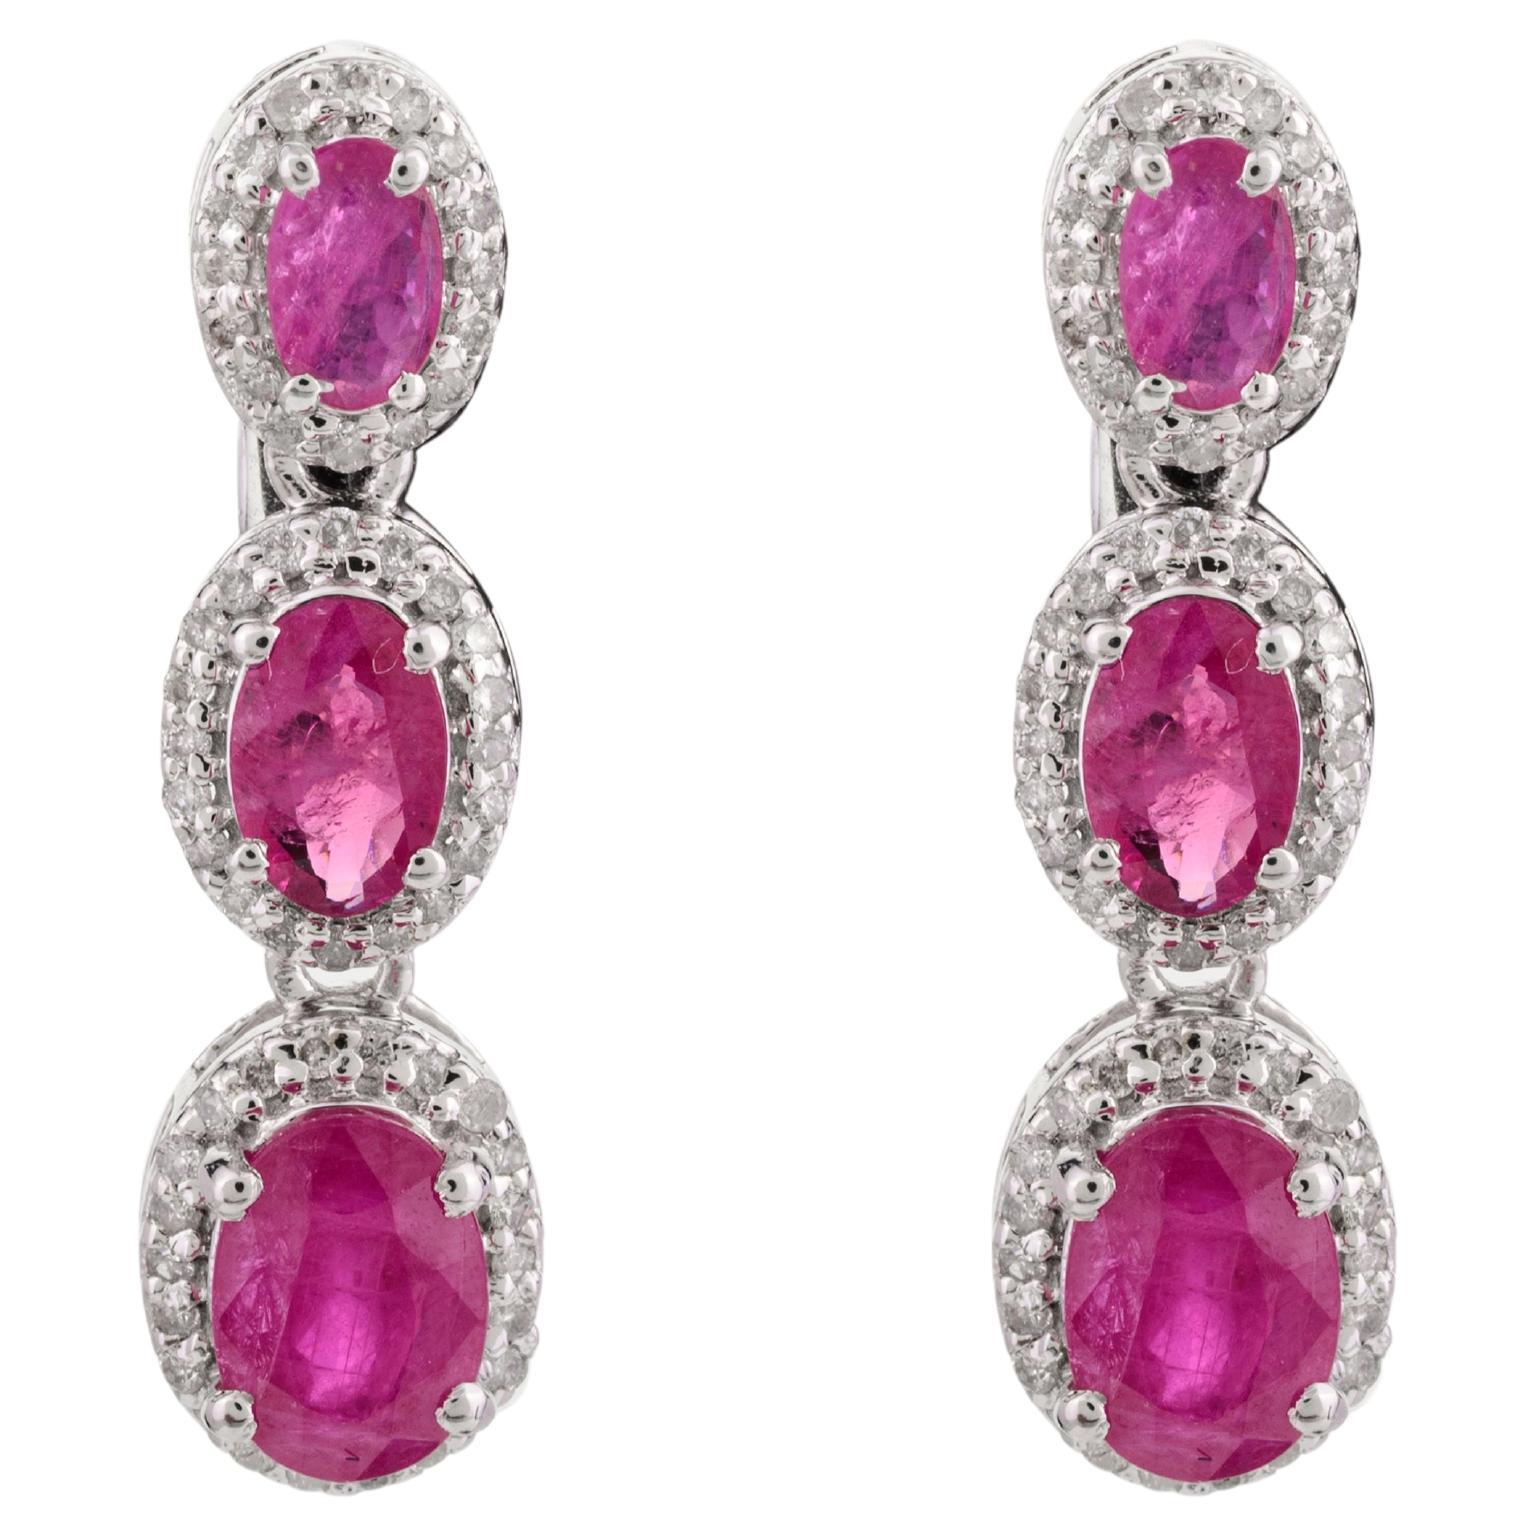 Ruby Halo Diamond Dangle Earrings in 14k Solid White Gold Gift for Her